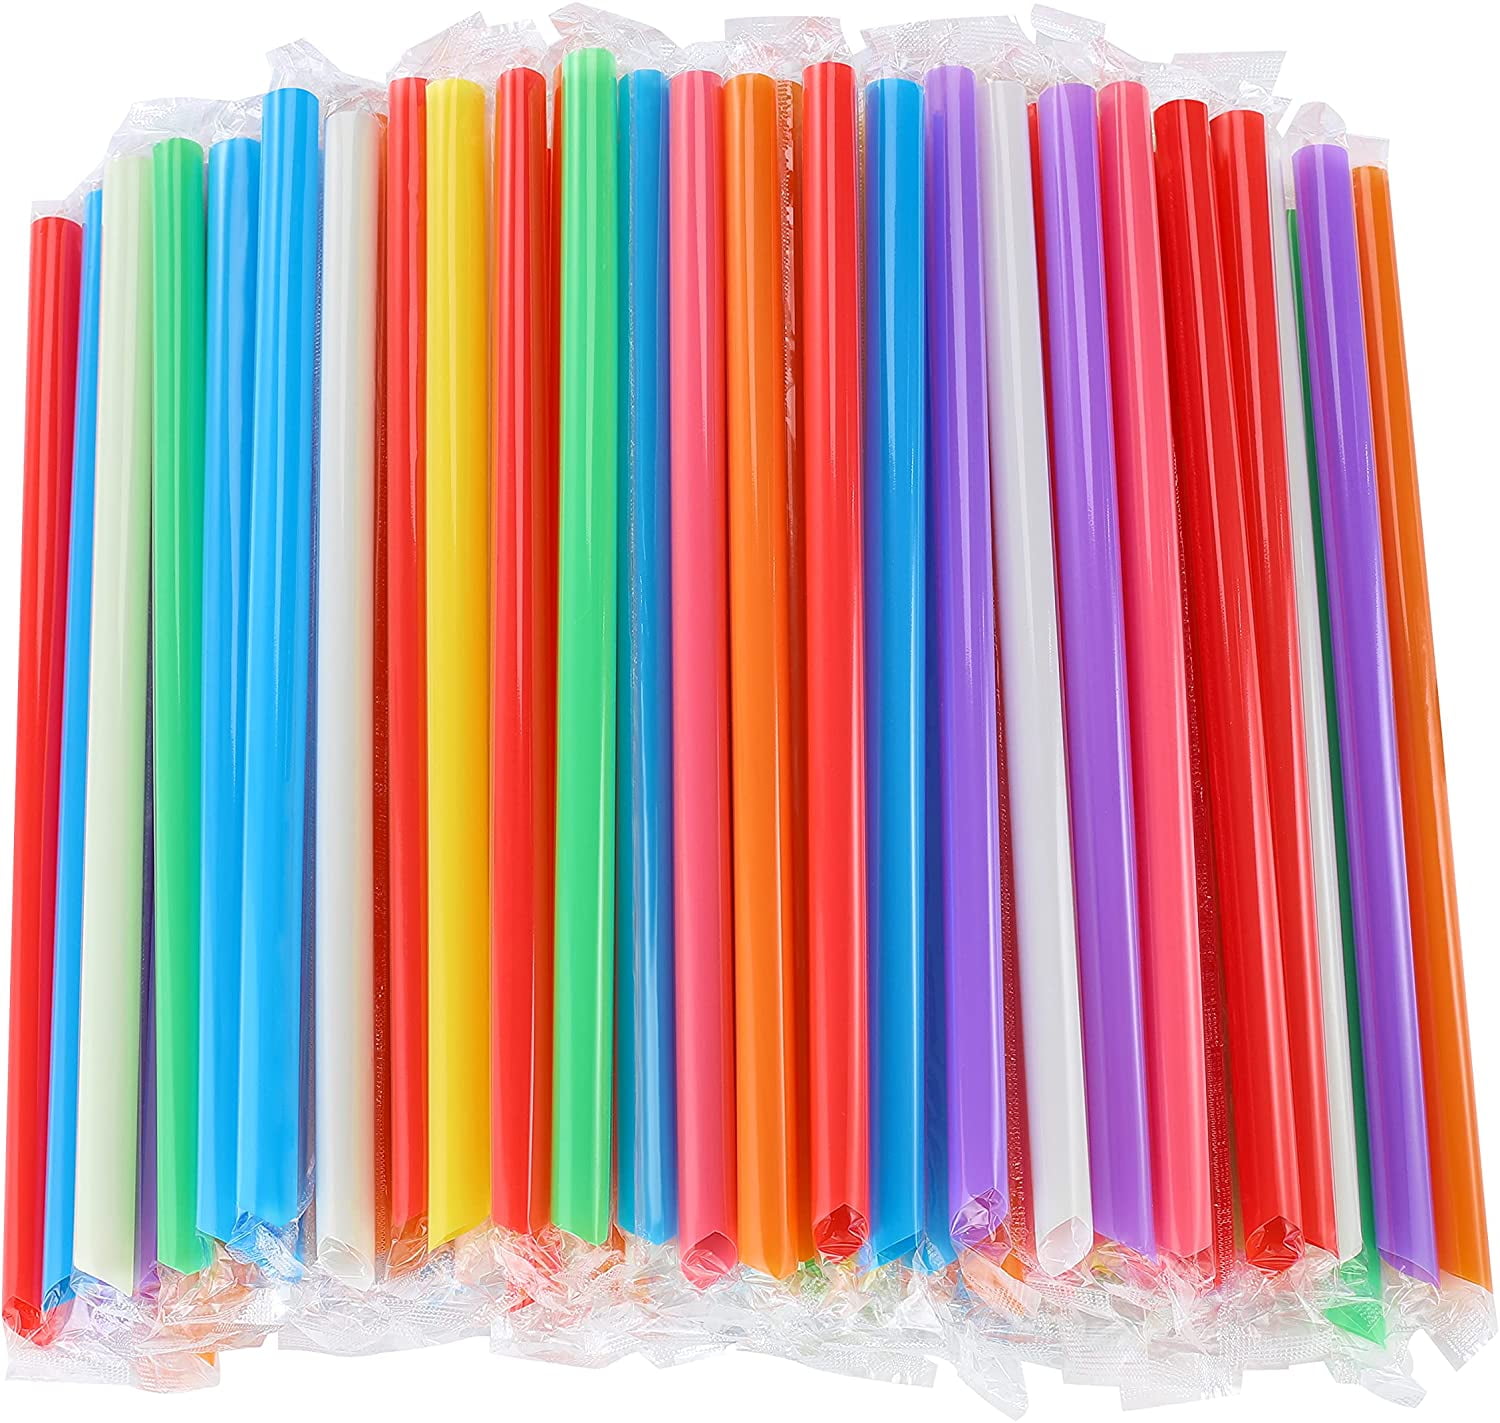 Thick Shake Rice Straws in Box, Size: 8mm * 22 cm